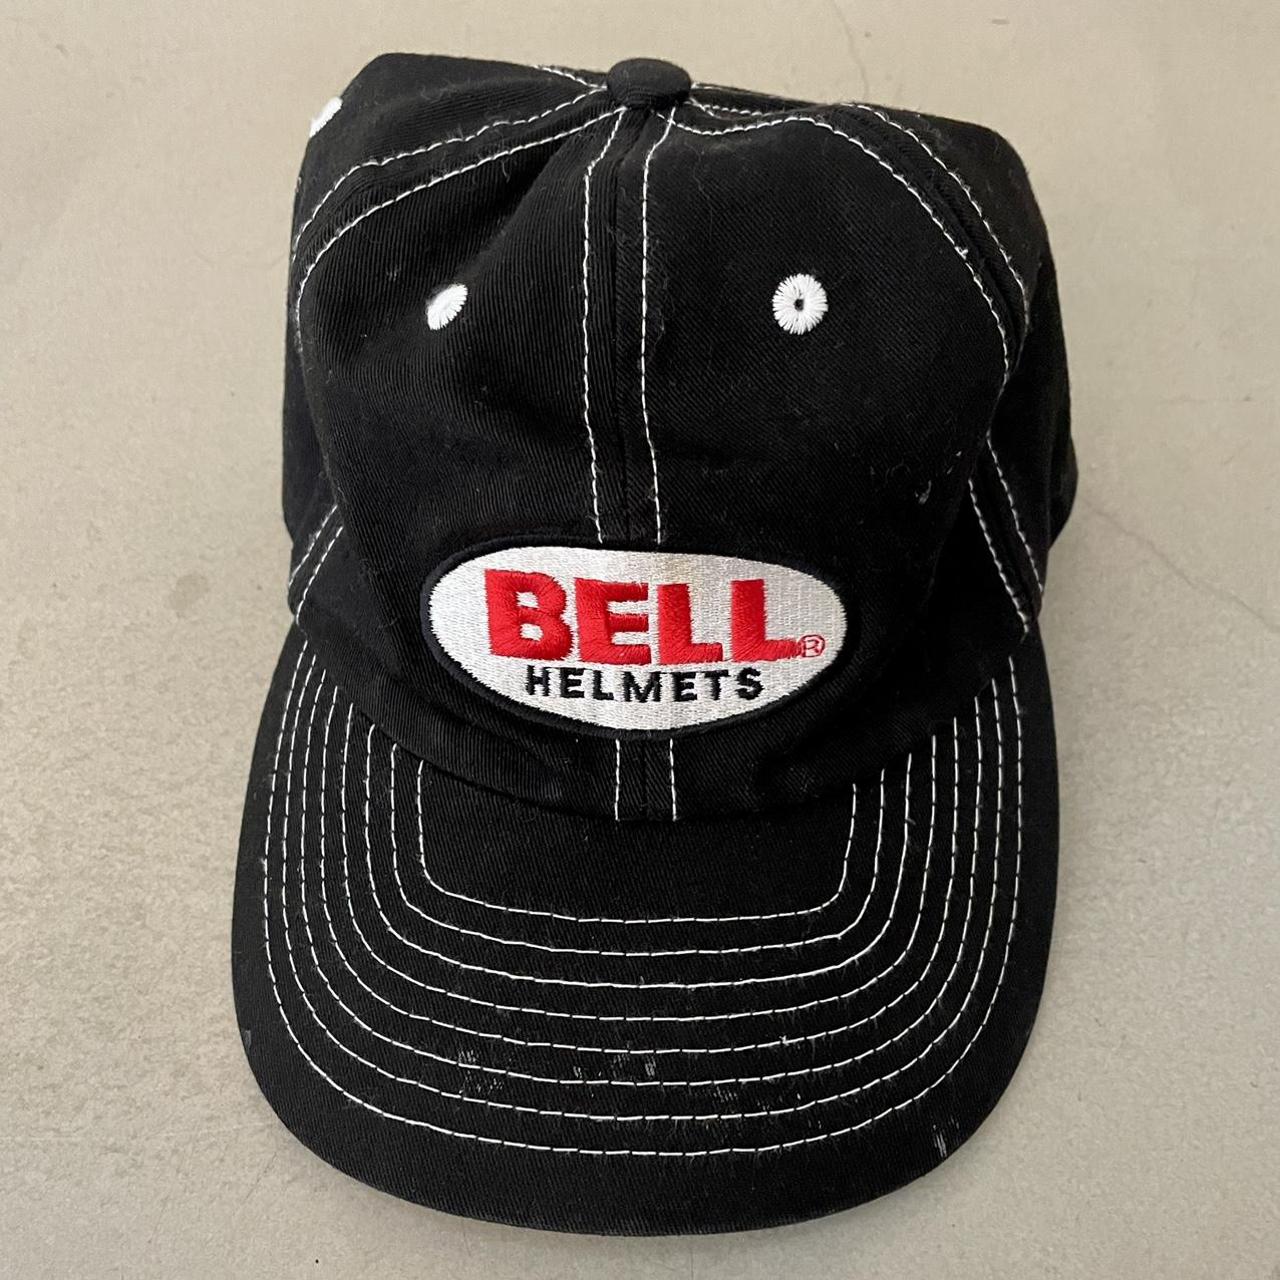 Bell Men's Black and Red Hat